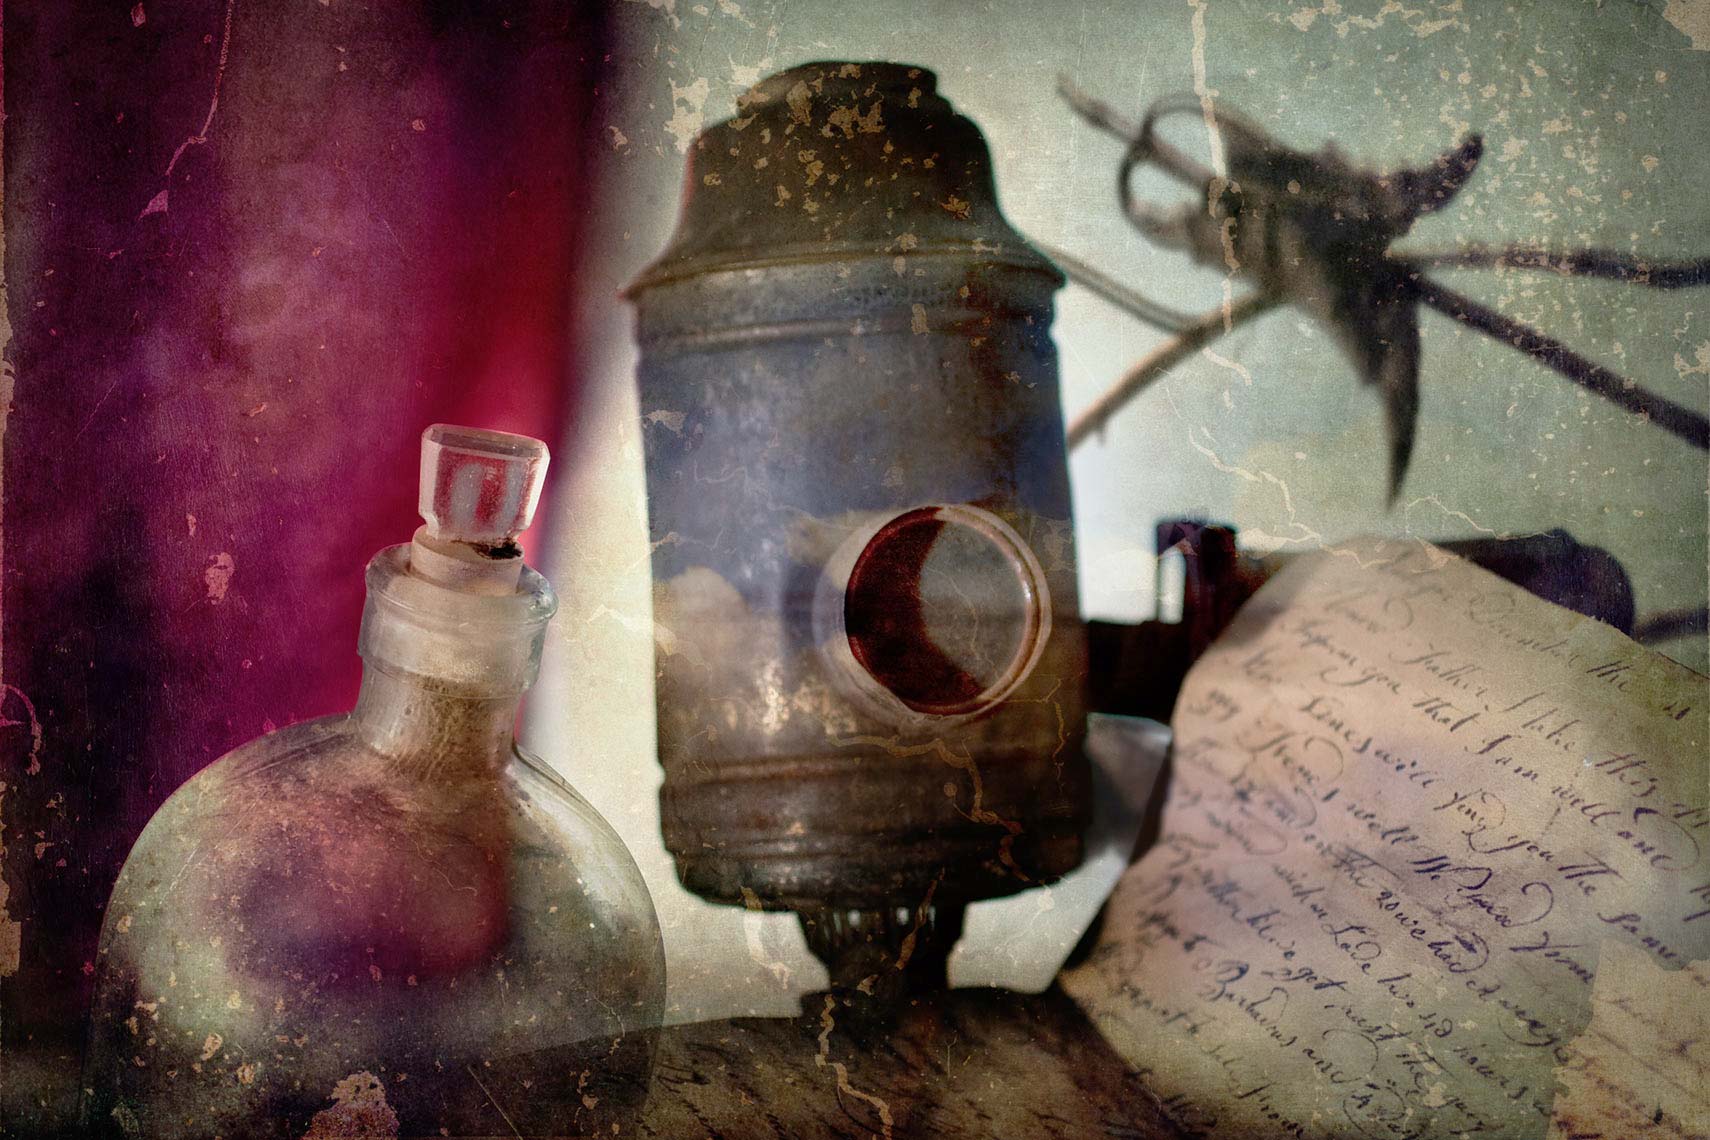 Still life of antique scientific object, vintage bottle, bird silhouette, drape, twig and old letter with quill-penned script against soft-focus painterly mottled background